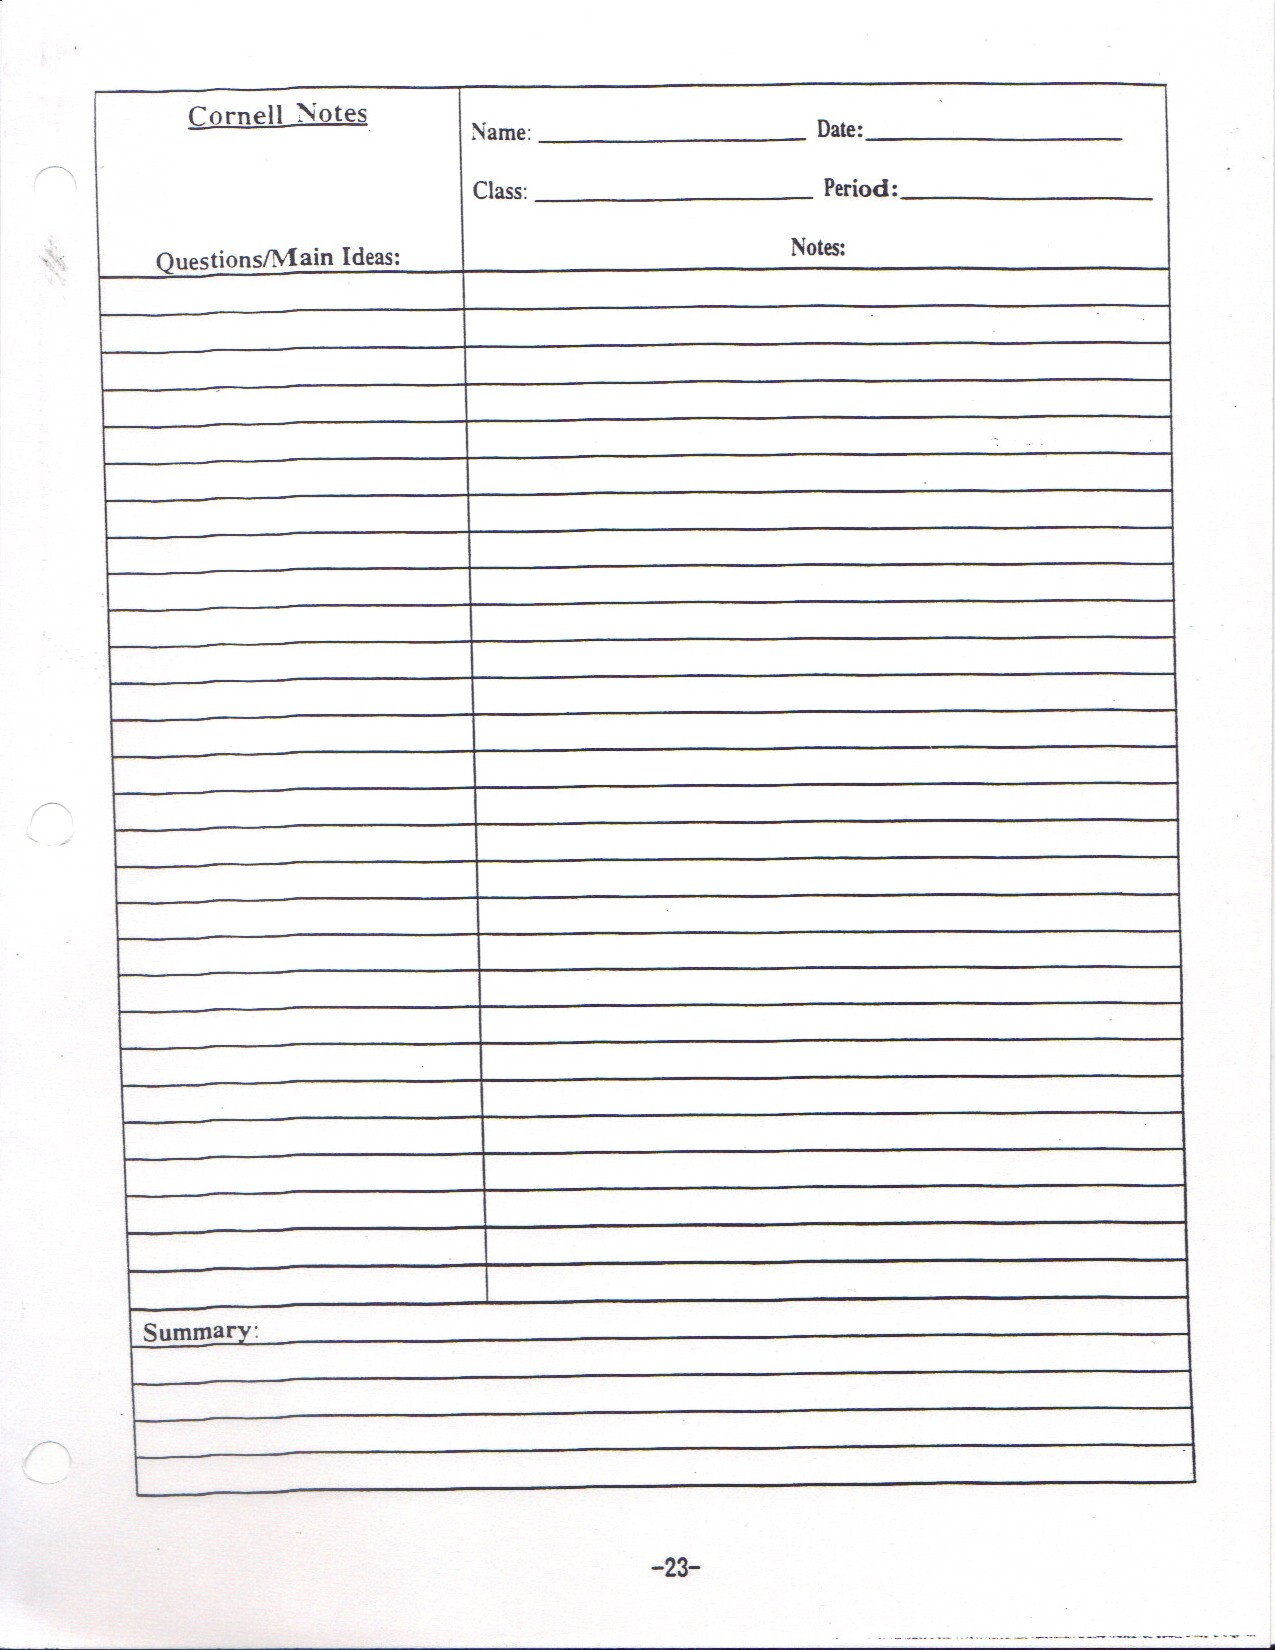 6-best-images-of-printable-cornell-note-sheet-avid-cornell-note-sheet